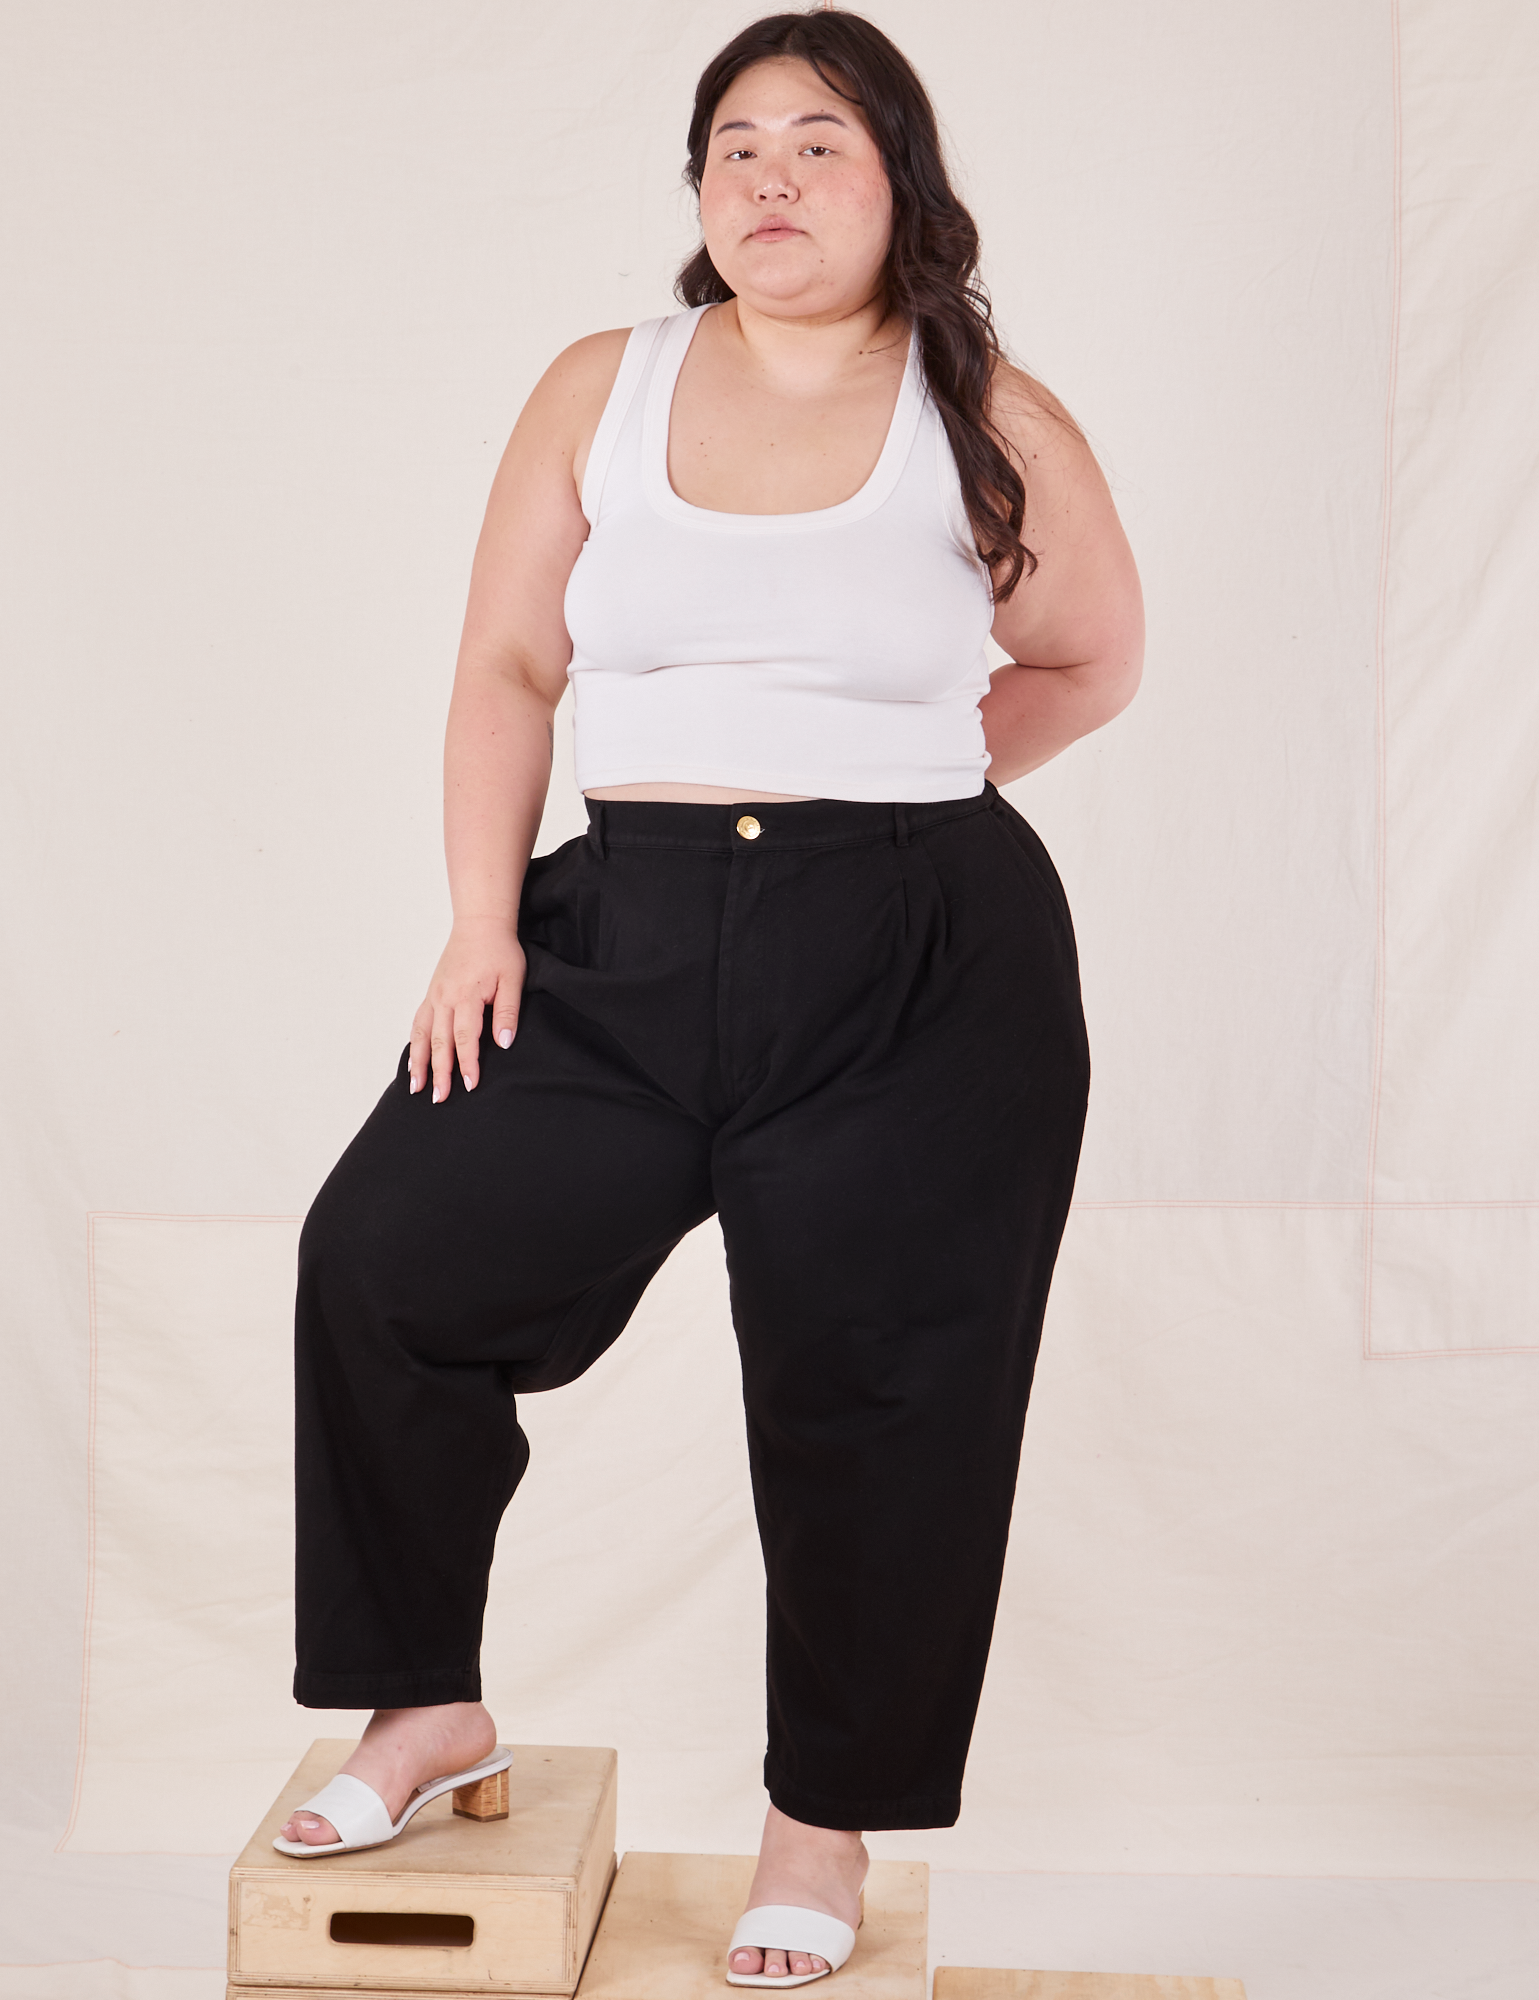 Ashley is 5&#39;7&quot; and wearing 1XL Petite Organic Trousers in Basic Black paired with vintage off-white Cropped Tank Top